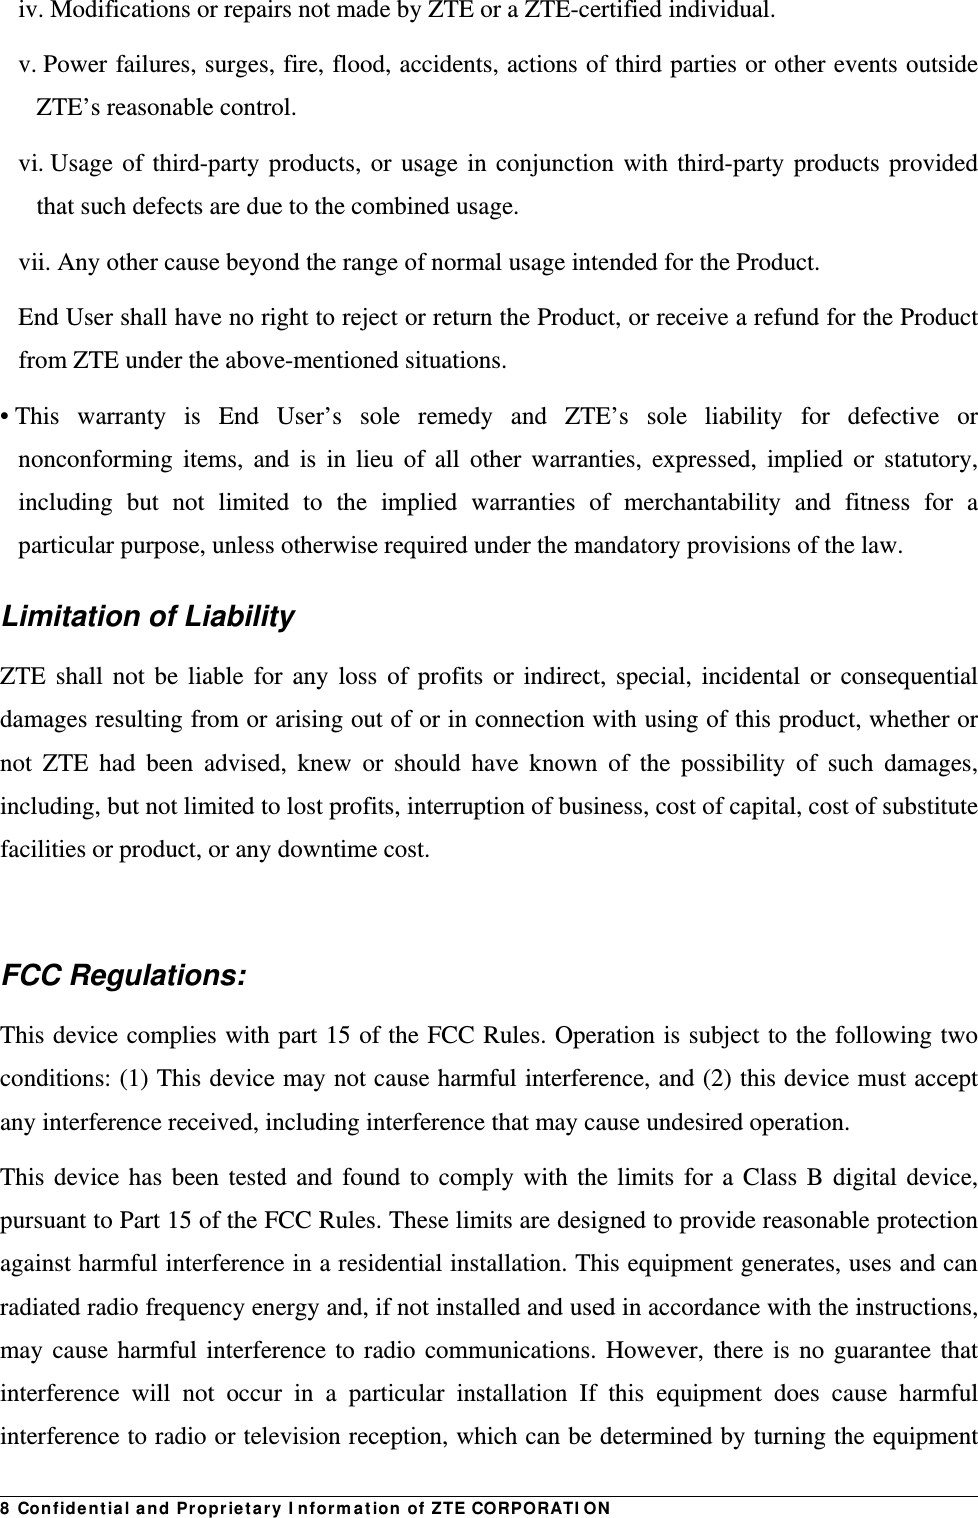 8 Confidential and Proprietary Information of ZTE CORPORATIONiv. Modifications or repairs not made by ZTE or a ZTE-certified individual. v. Power failures, surges, fire, flood, accidents, actions of third parties or other events outside ZTE’s reasonable control. vi. Usage of third-party products, or usage in conjunction with third-party products provided that such defects are due to the combined usage. vii. Any other cause beyond the range of normal usage intended for the Product. End User shall have no right to reject or return the Product, or receive a refund for the Product from ZTE under the above-mentioned situations. • This warranty is End User’s sole remedy and ZTE’s sole liability for defective or nonconforming items, and is in lieu of all other warranties, expressed, implied or statutory, including but not limited to the implied warranties of merchantability and fitness for a particular purpose, unless otherwise required under the mandatory provisions of the law. Limitation of Liability ZTE shall not be liable for any loss of profits or indirect, special, incidental or consequential damages resulting from or arising out of or in connection with using of this product, whether or not ZTE had been advised, knew or should have known of the possibility of such damages, including, but not limited to lost profits, interruption of business, cost of capital, cost of substitute facilities or product, or any downtime cost.  FCC Regulations: This device complies with part 15 of the FCC Rules. Operation is subject to the following two conditions: (1) This device may not cause harmful interference, and (2) this device must accept any interference received, including interference that may cause undesired operation. This device has been tested and found to comply with the limits for a Class B digital device, pursuant to Part 15 of the FCC Rules. These limits are designed to provide reasonable protection against harmful interference in a residential installation. This equipment generates, uses and can radiated radio frequency energy and, if not installed and used in accordance with the instructions, may cause harmful interference to radio communications. However, there is no guarantee that interference will not occur in a particular installation If this equipment does cause harmful interference to radio or television reception, which can be determined by turning the equipment 